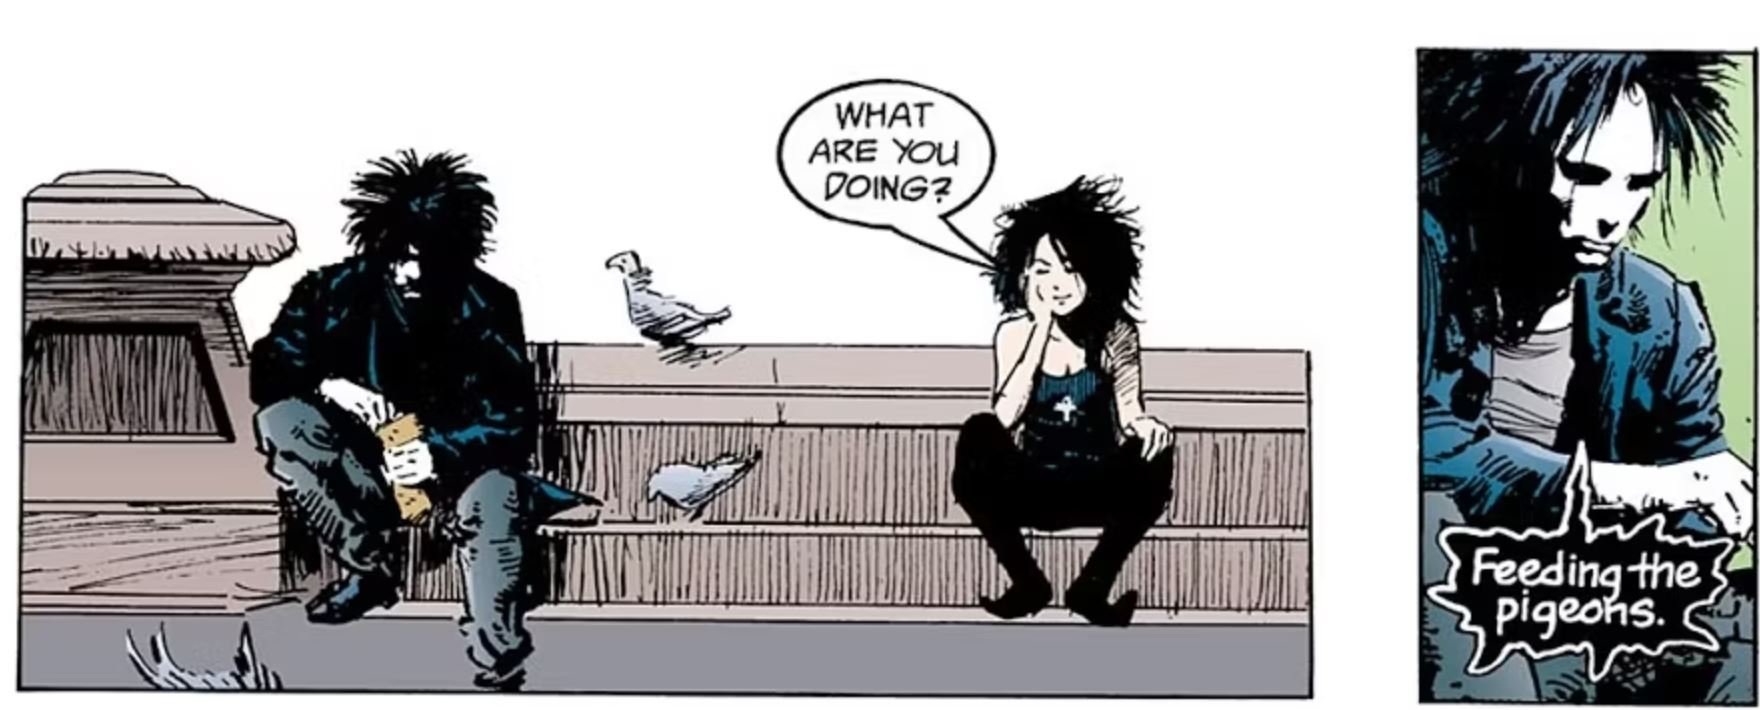 Sandman, The Sound of her Wings, two panels. First panel, Morpheus sitting on some steps, surrounded by pigeons and holding a little bag in his hands. Death sits a little ways next to him, chin propped in one hand, looking decidedly brighter and more cheerful as his counterpoint. She asks, "What are you doing?" Second panel, Morpheus: "Feeding the pigeons."